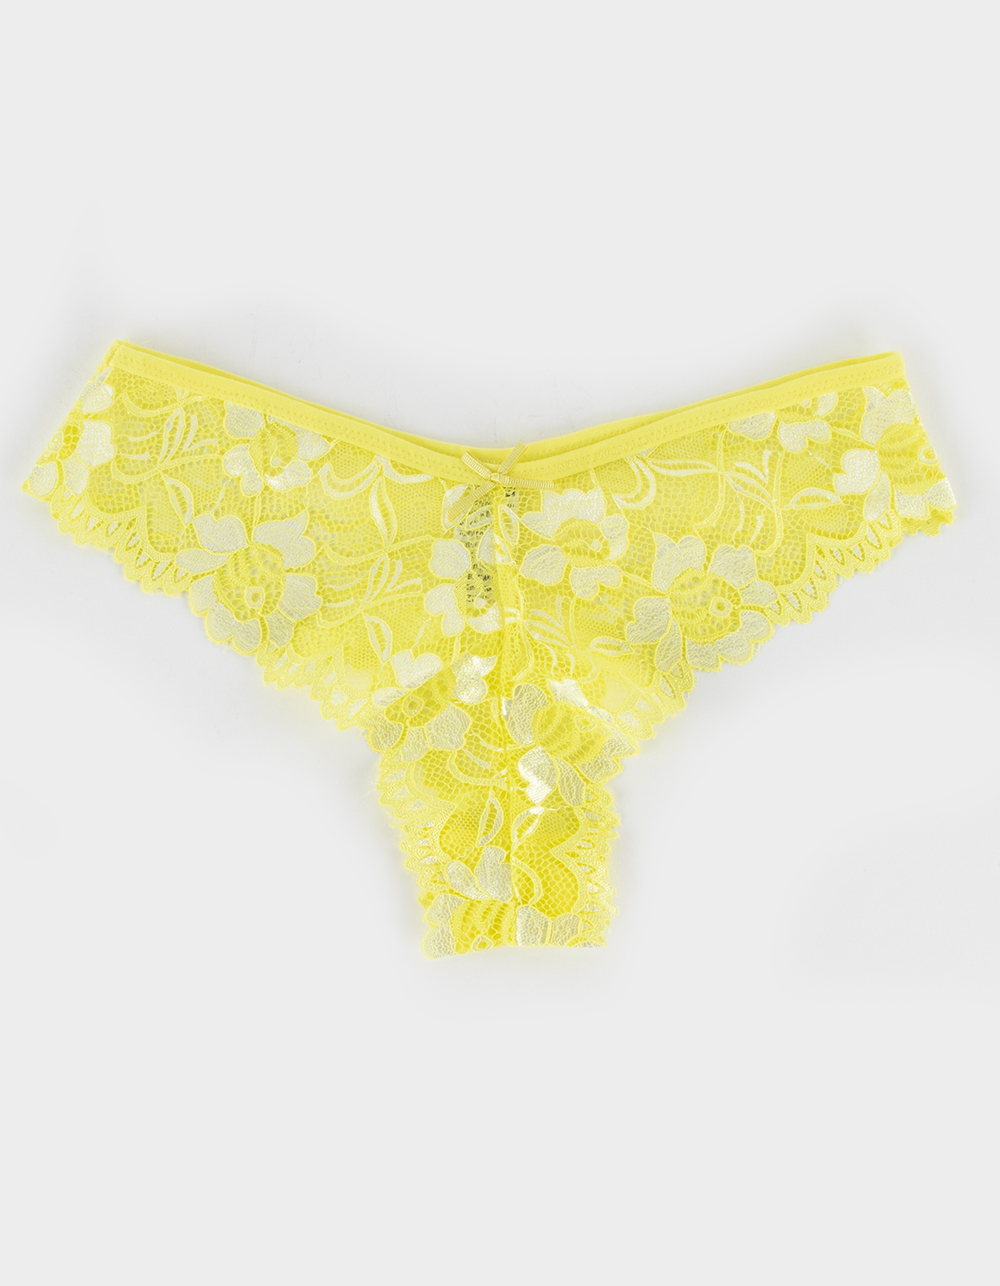 SPREE INTIMATES Scallop Lace Thong - LIME